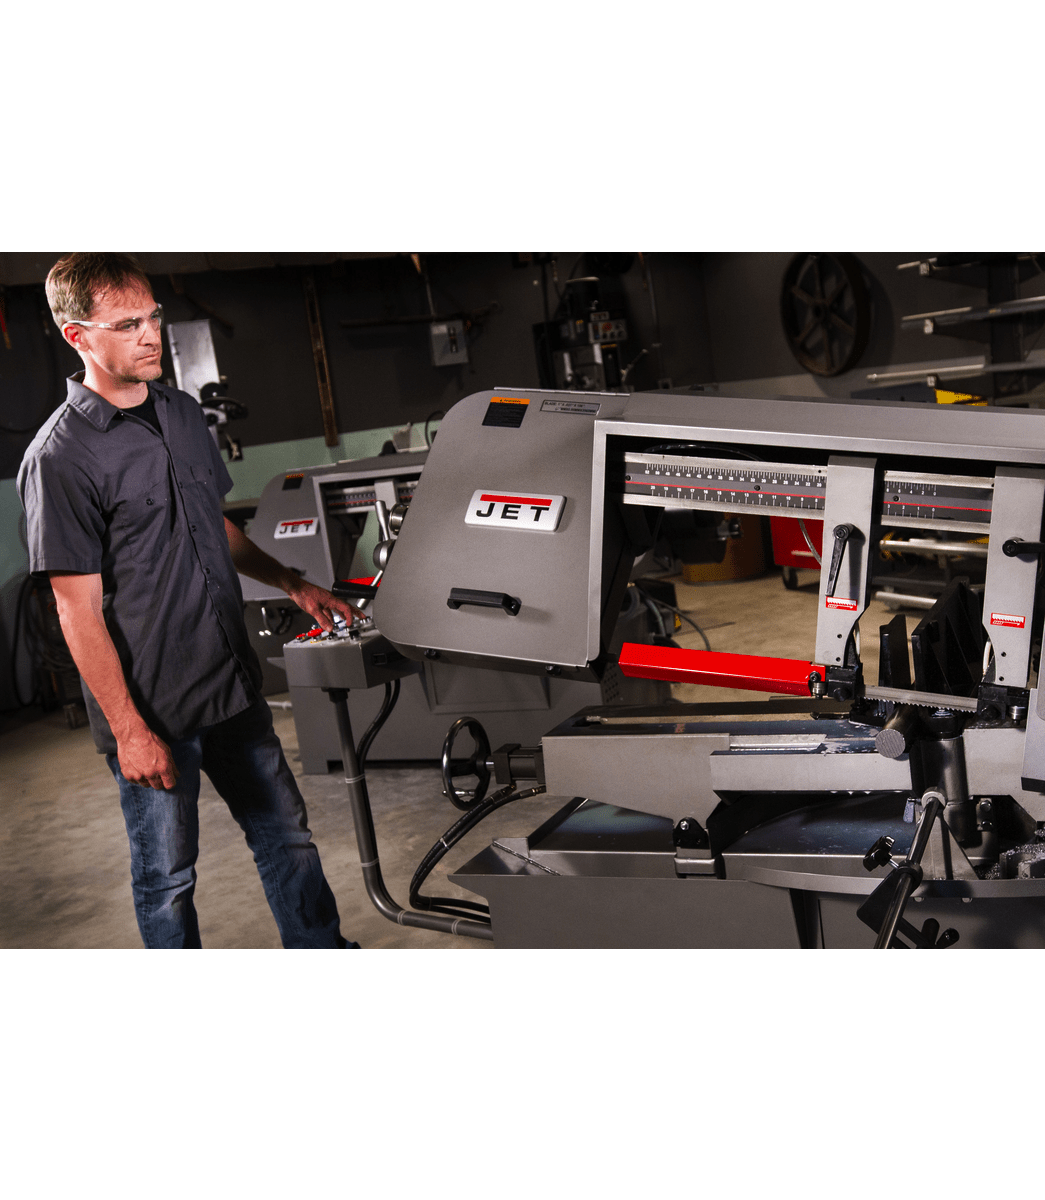 HBS-1220MSAH, 12" x 20" Semi-Automatic Mitering Variable Speed Bandsaw with Hydraulic Vise - Jet